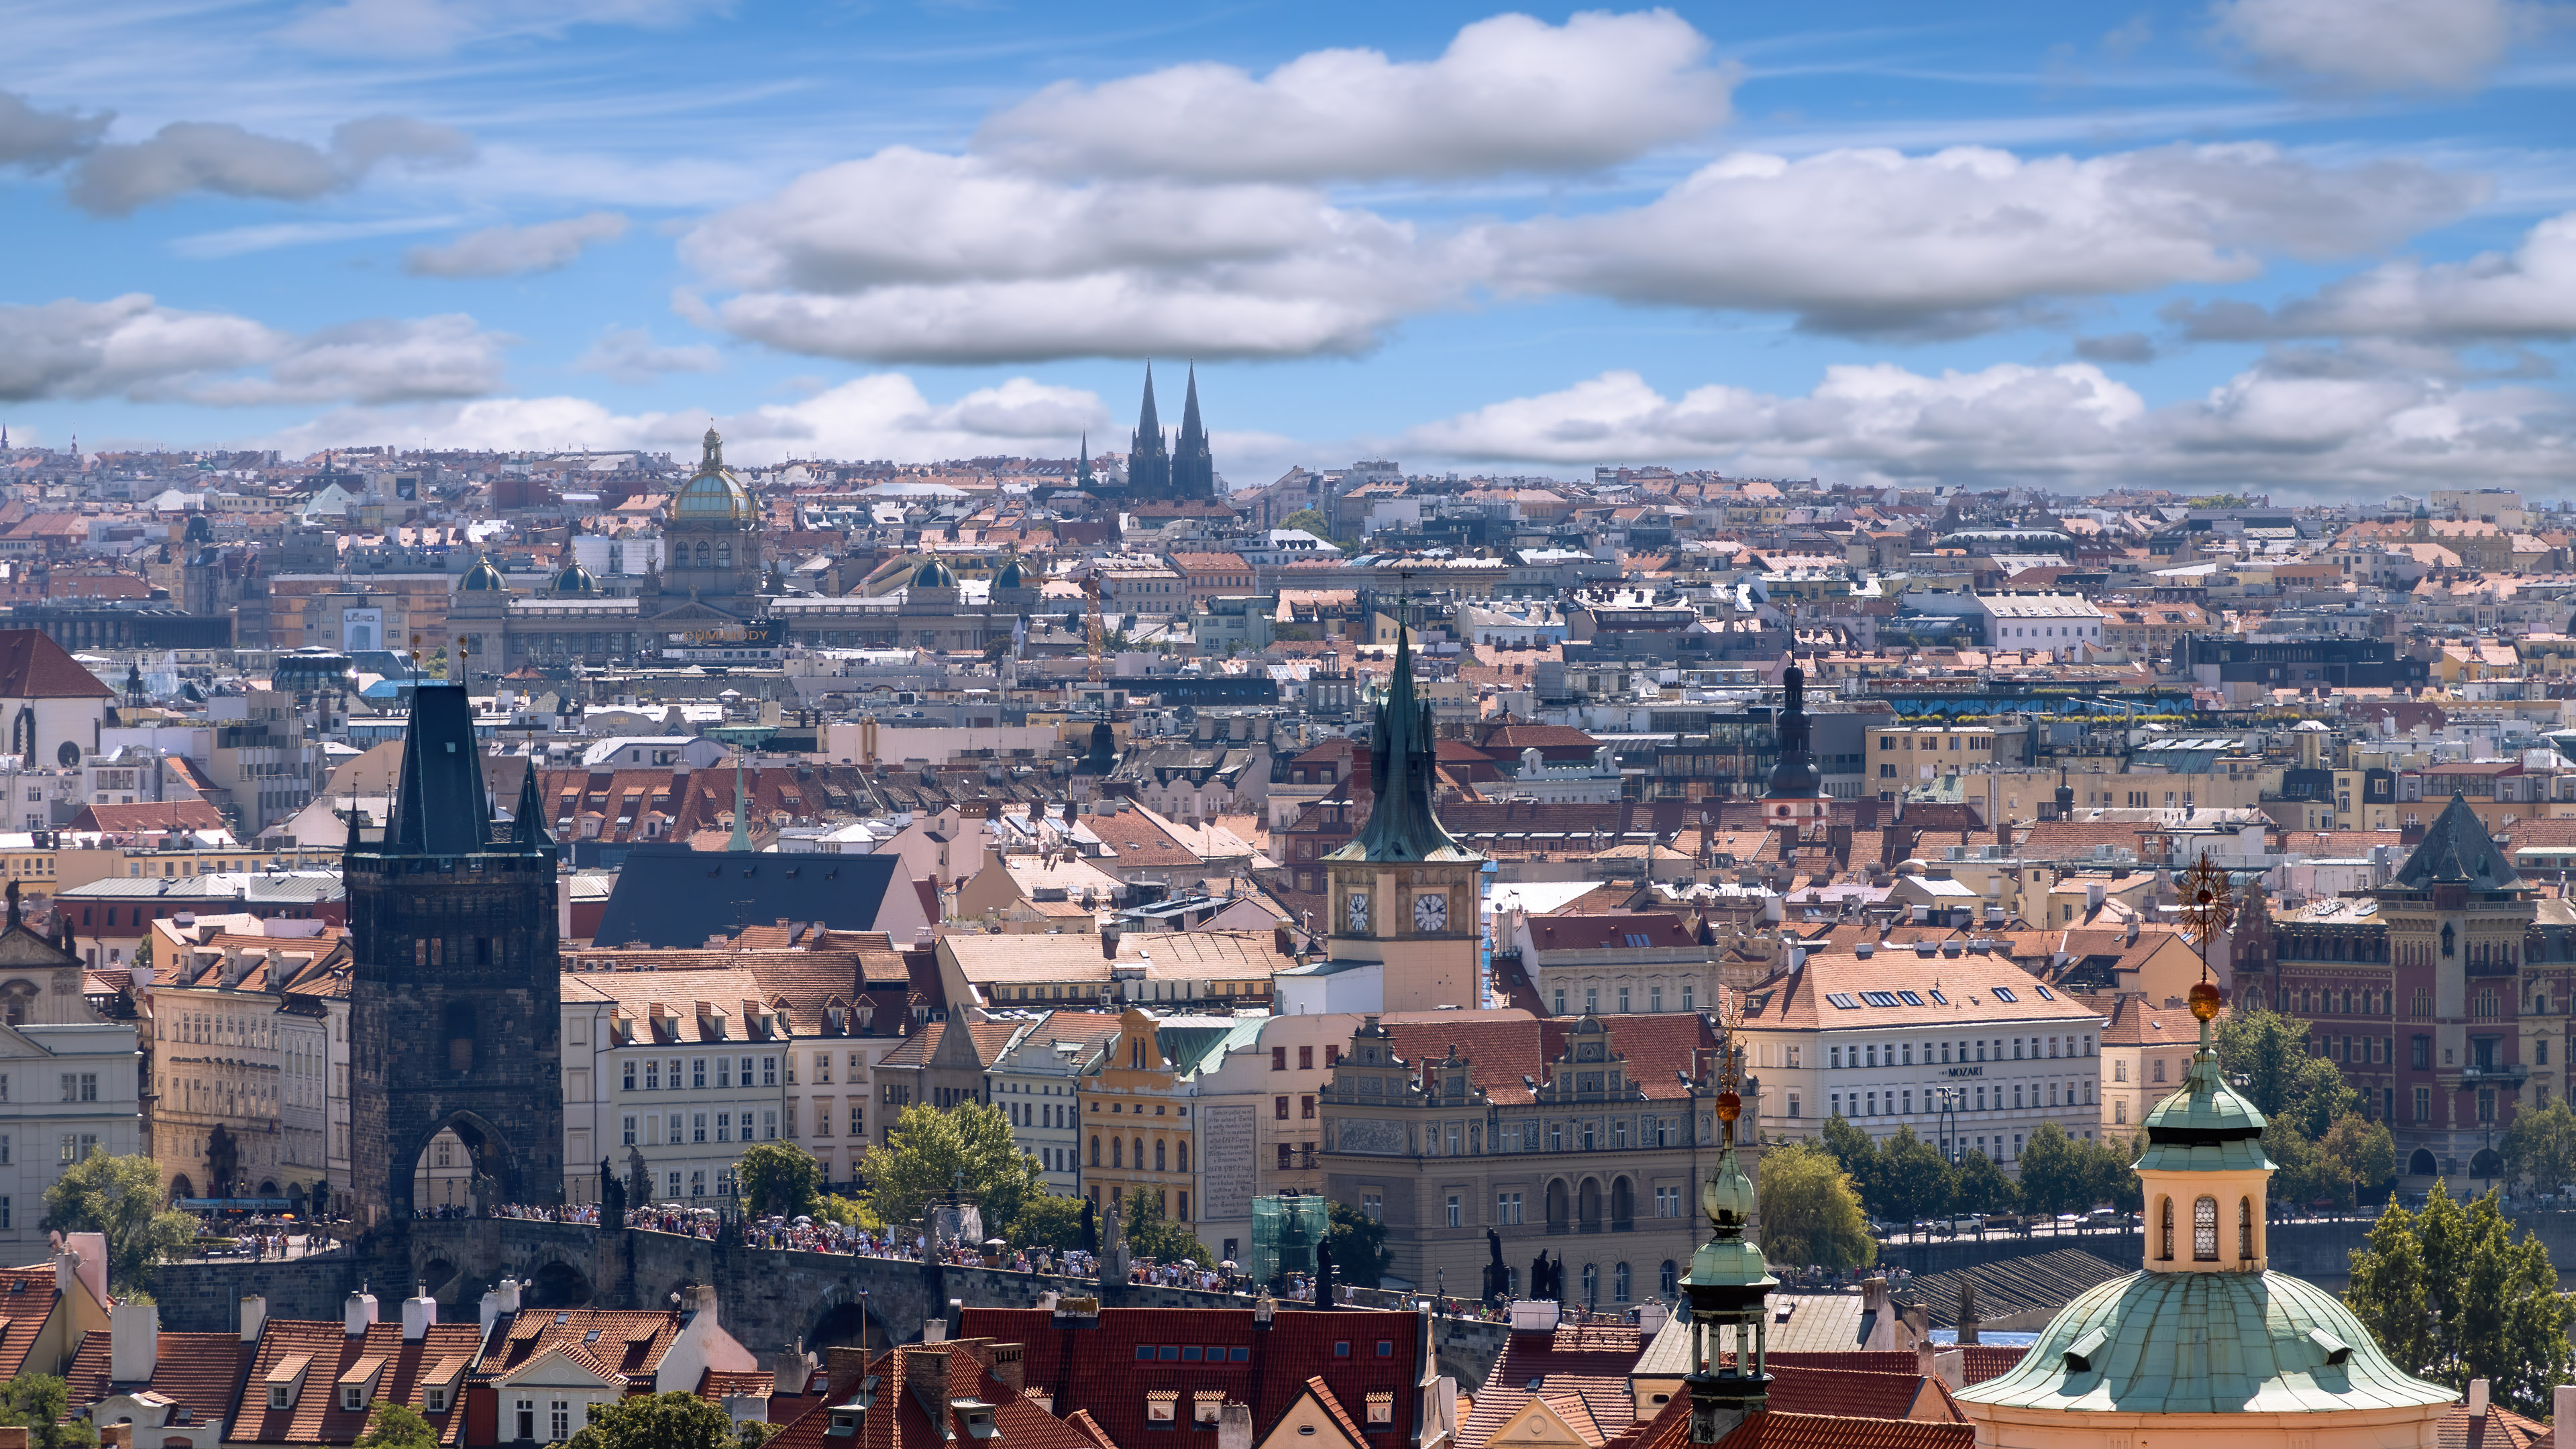 Bring the panoramic views of Prague into your home with this stunning cityscape wallpaper